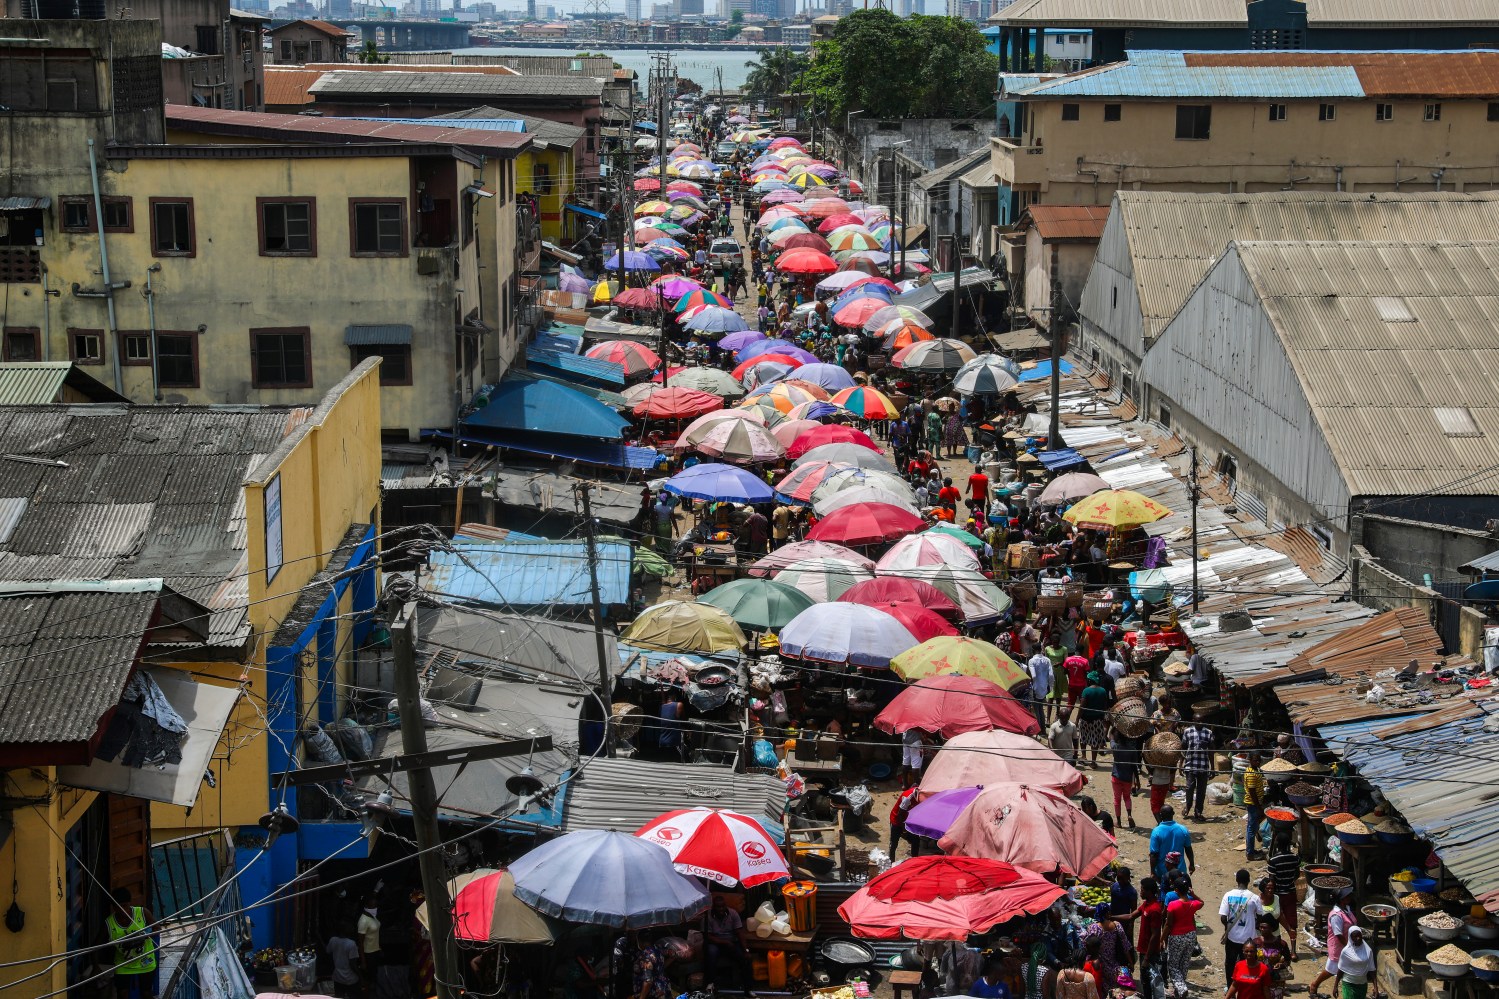 A general view of a food market after Nigeria's President Muhammadu Buhari called for a lockdown starting tonight to limit the spread of coronavirus disease (COVID-19), in Lagos, Nigeria March 30, 2020. REUTERS/Temilade Adelaja